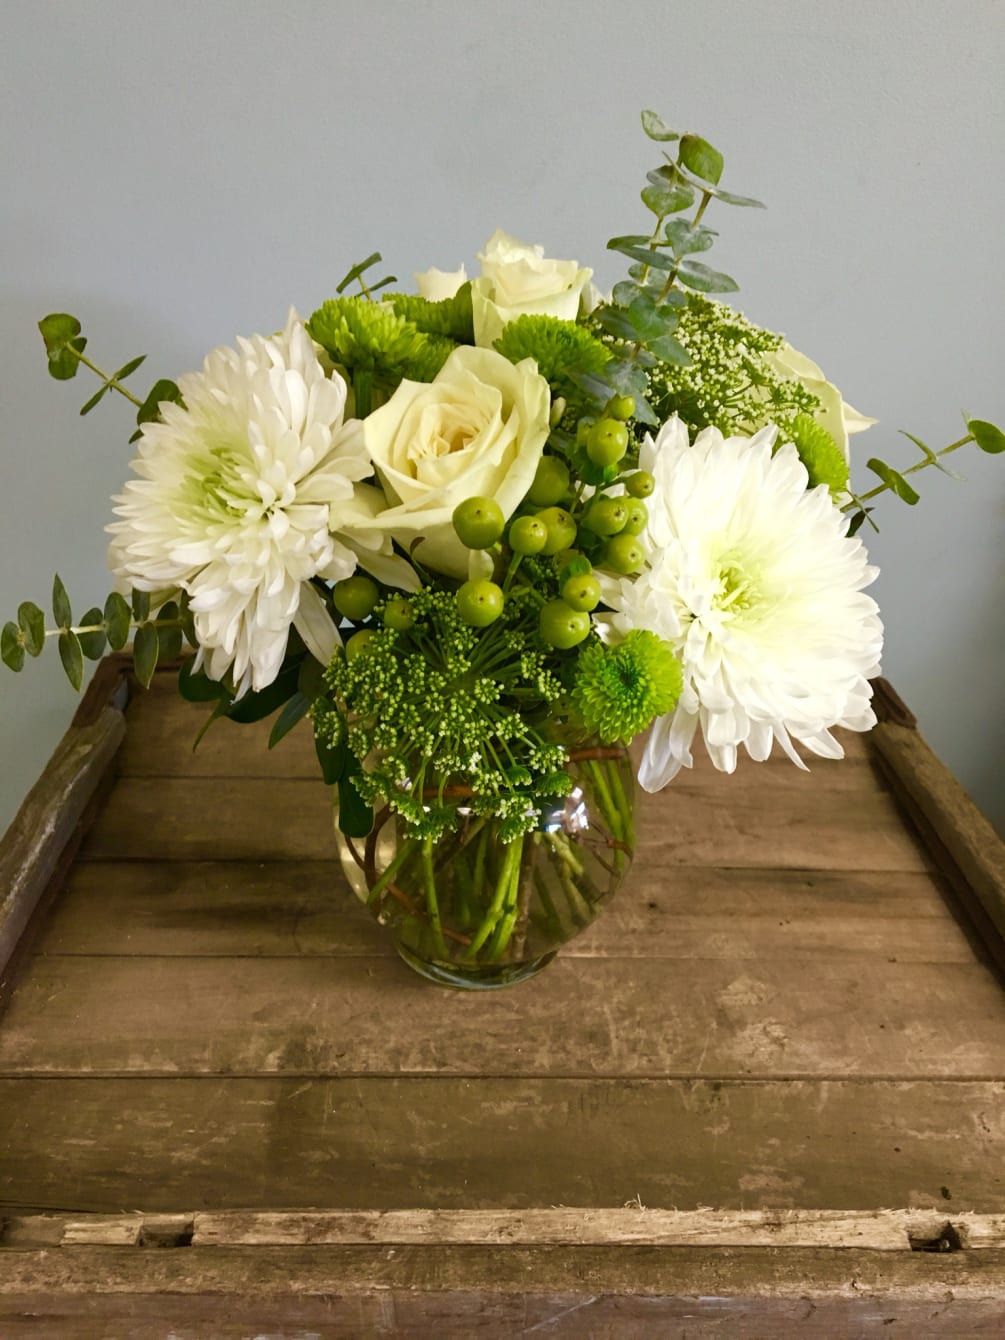 Green and white flowers in a bubble bowl, a classy way to